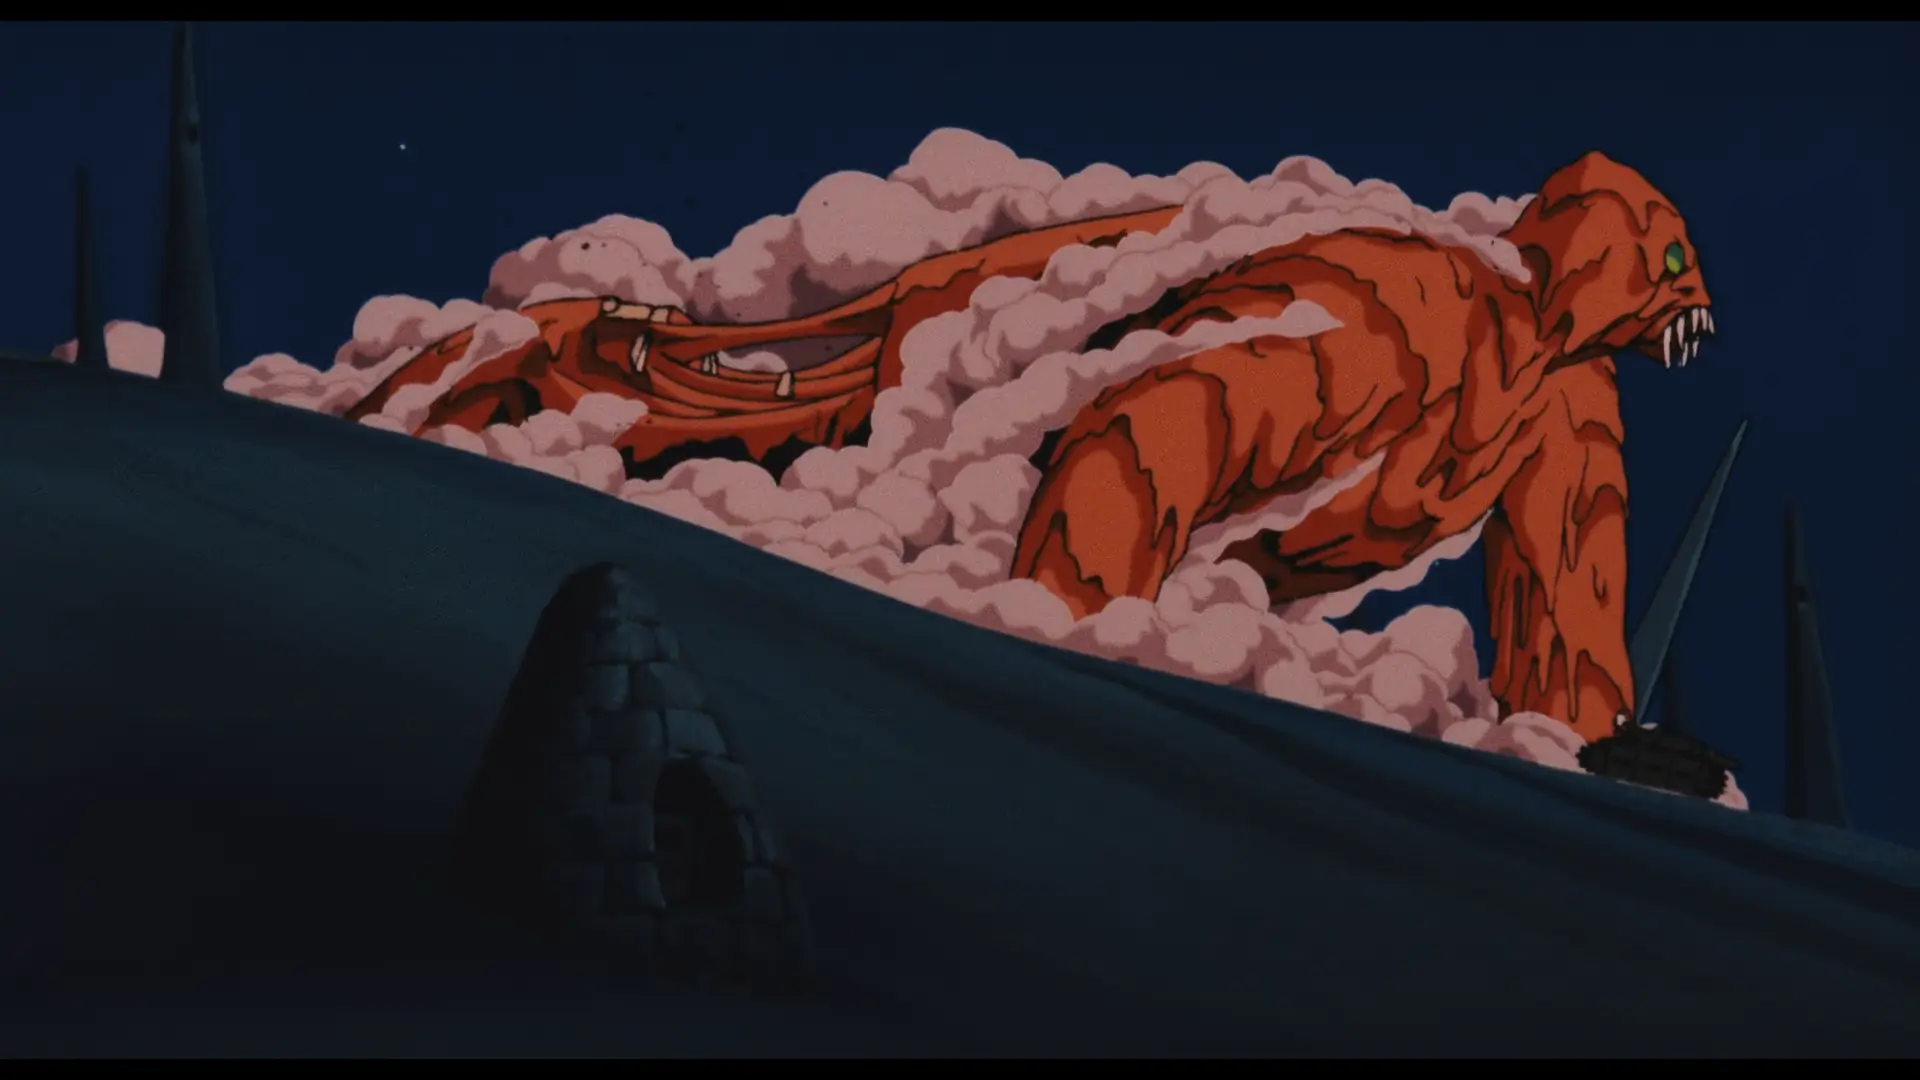 Still from Nausicaa of the Valley of the Wind (1984). The God Warrior, surrounded by clouds of steam and dripping melted flesh, crawls after Kushana's tank, tearing its torso away from its legs.